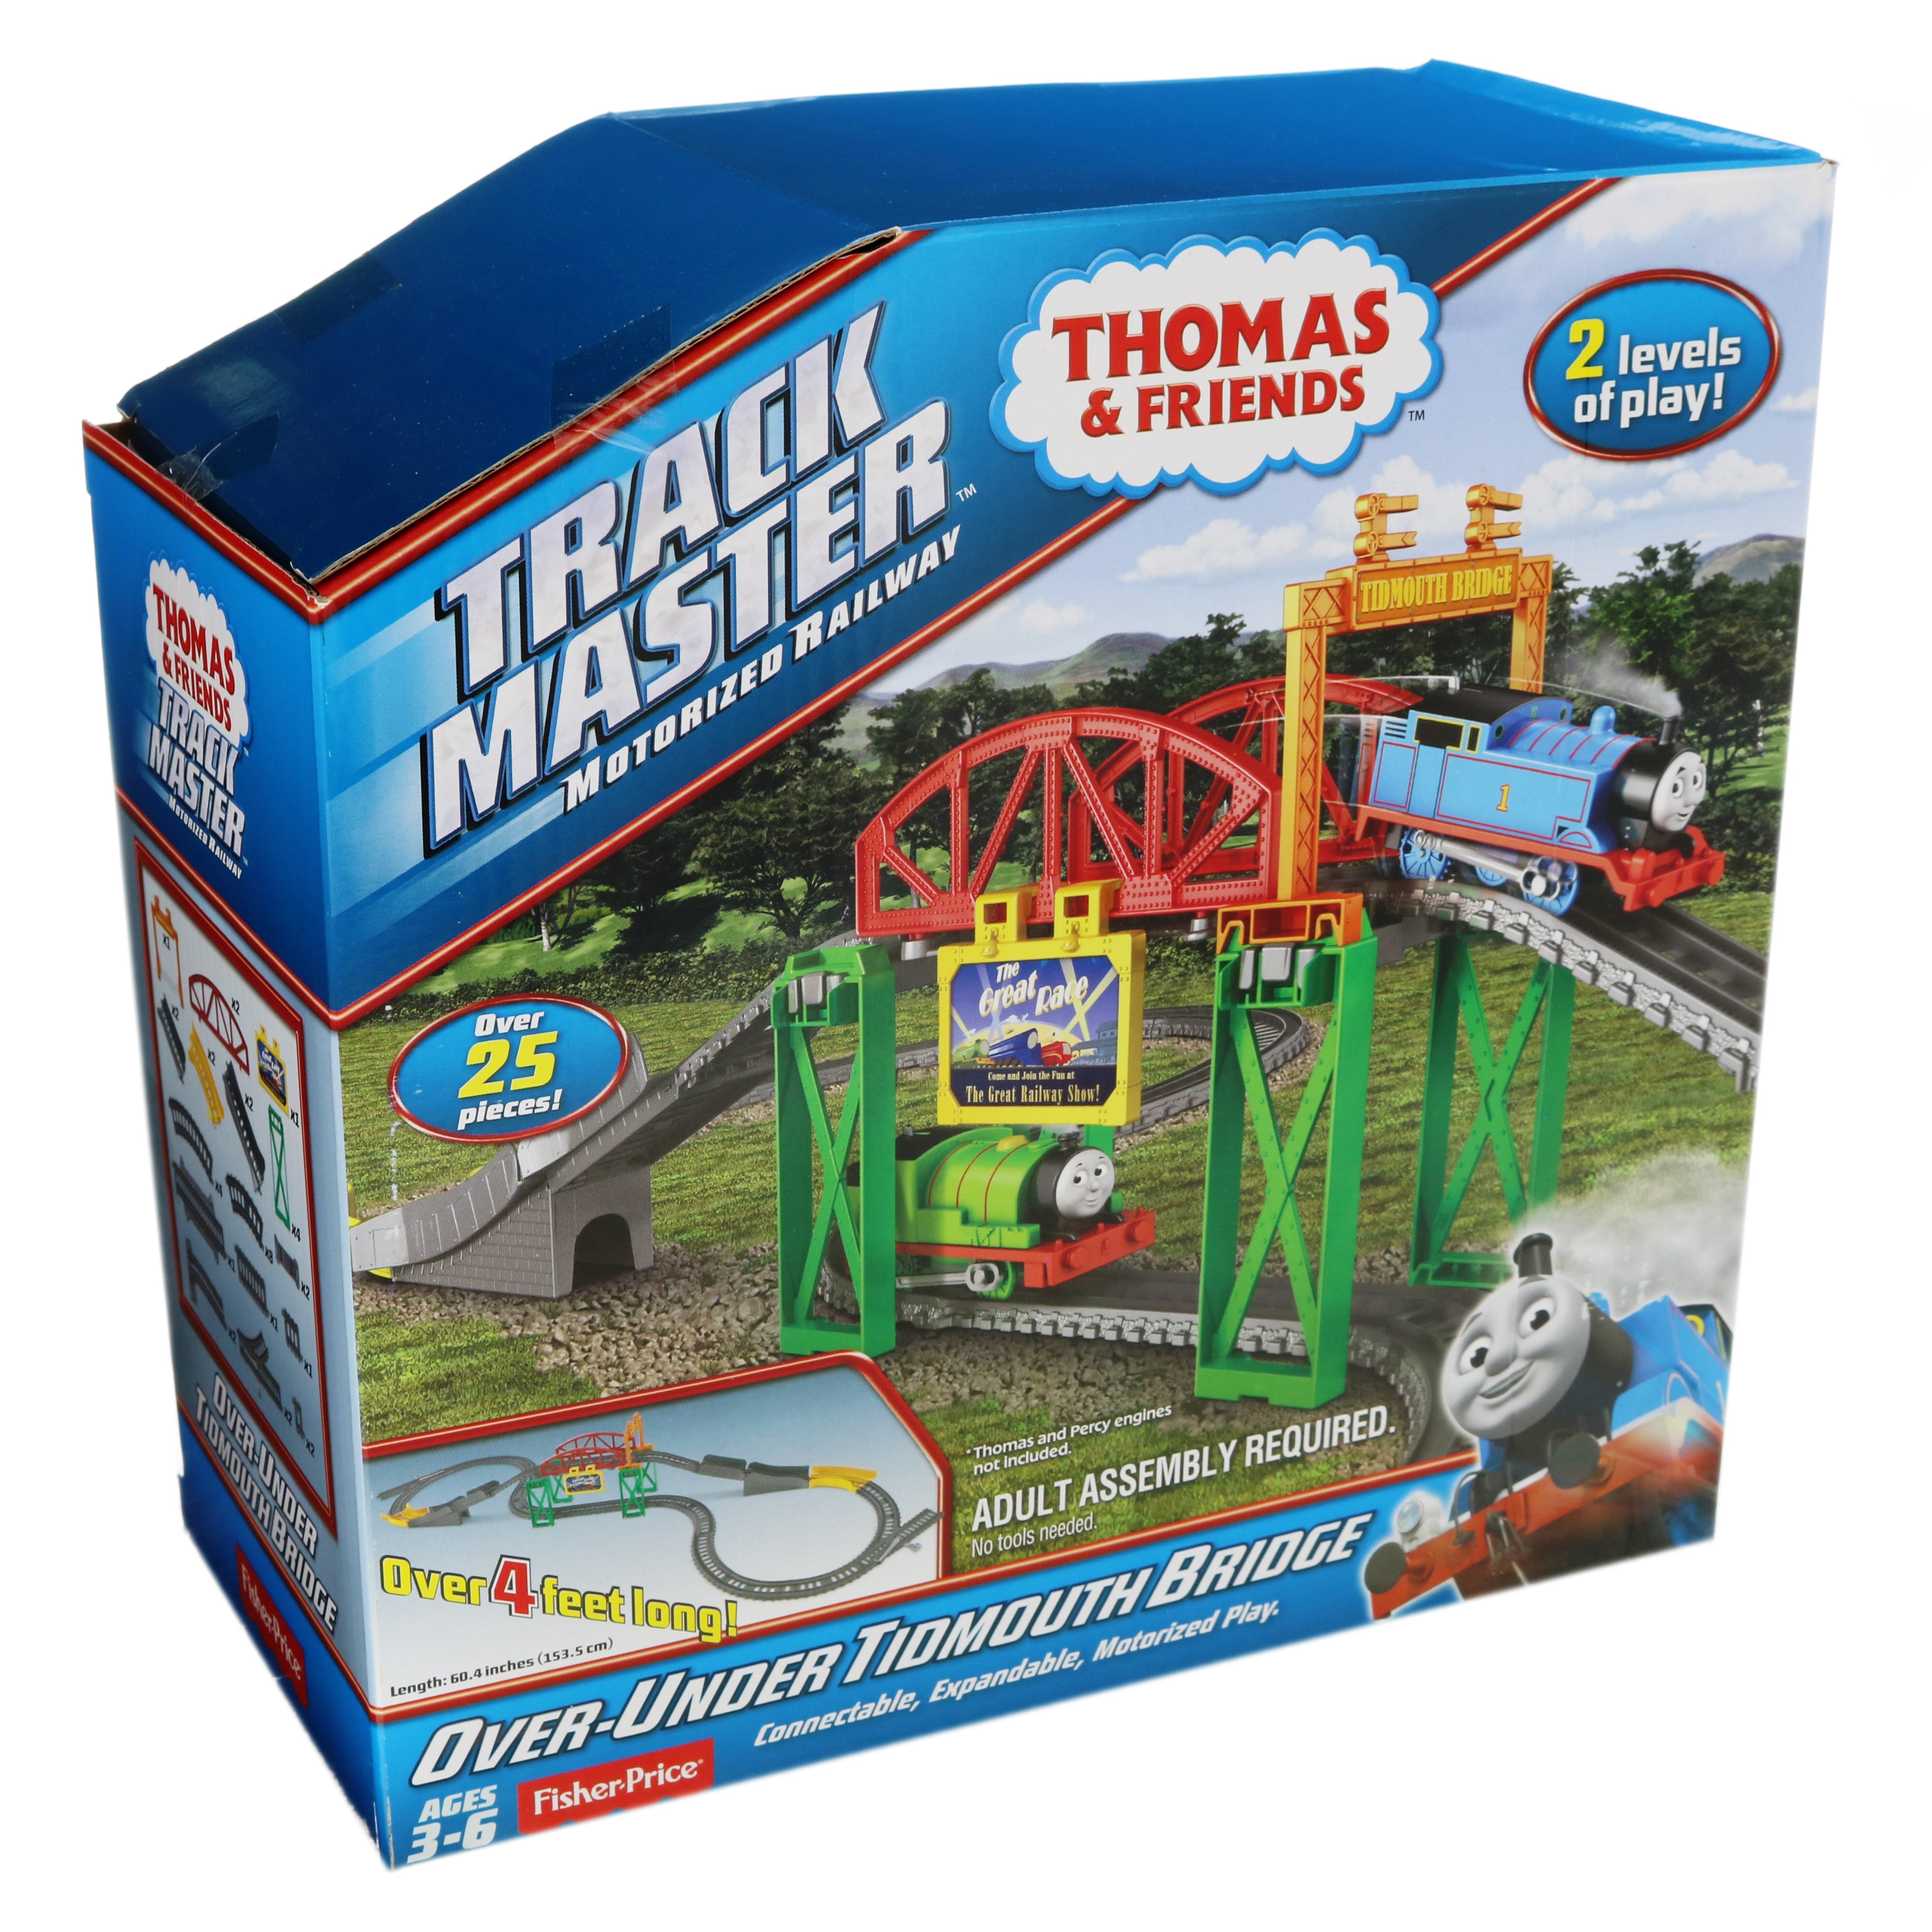 trackmaster playsets